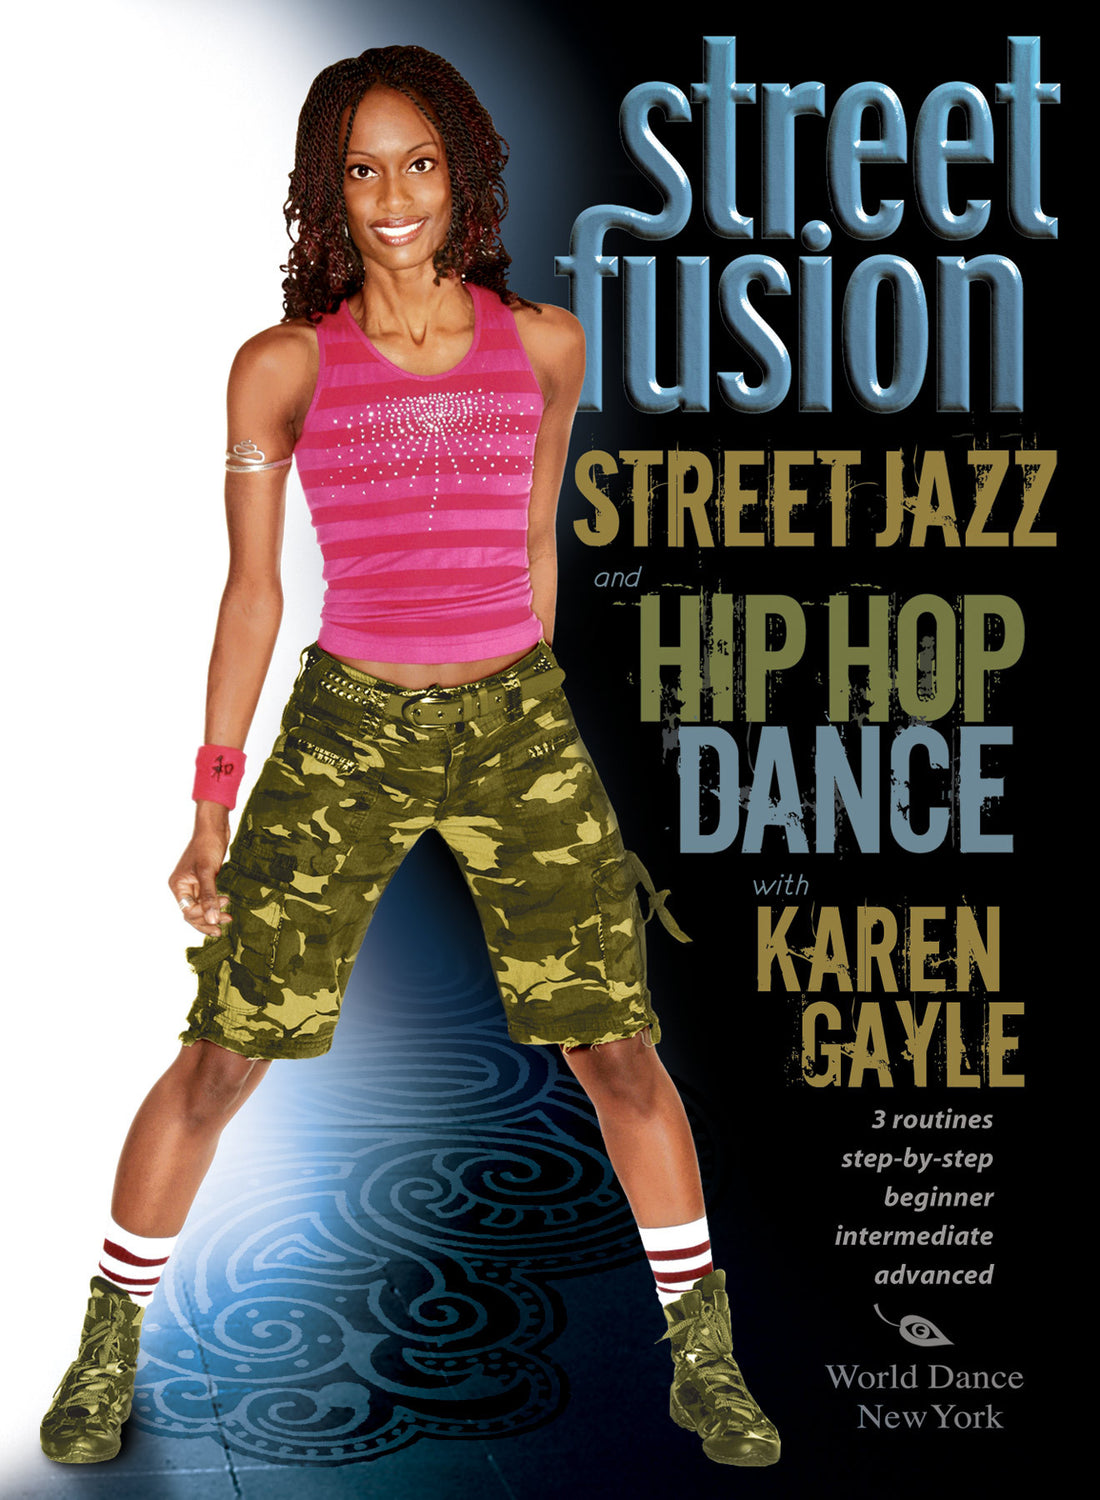 Tribal Fusion & Hip-Hop Dance classes on video / online or DVD